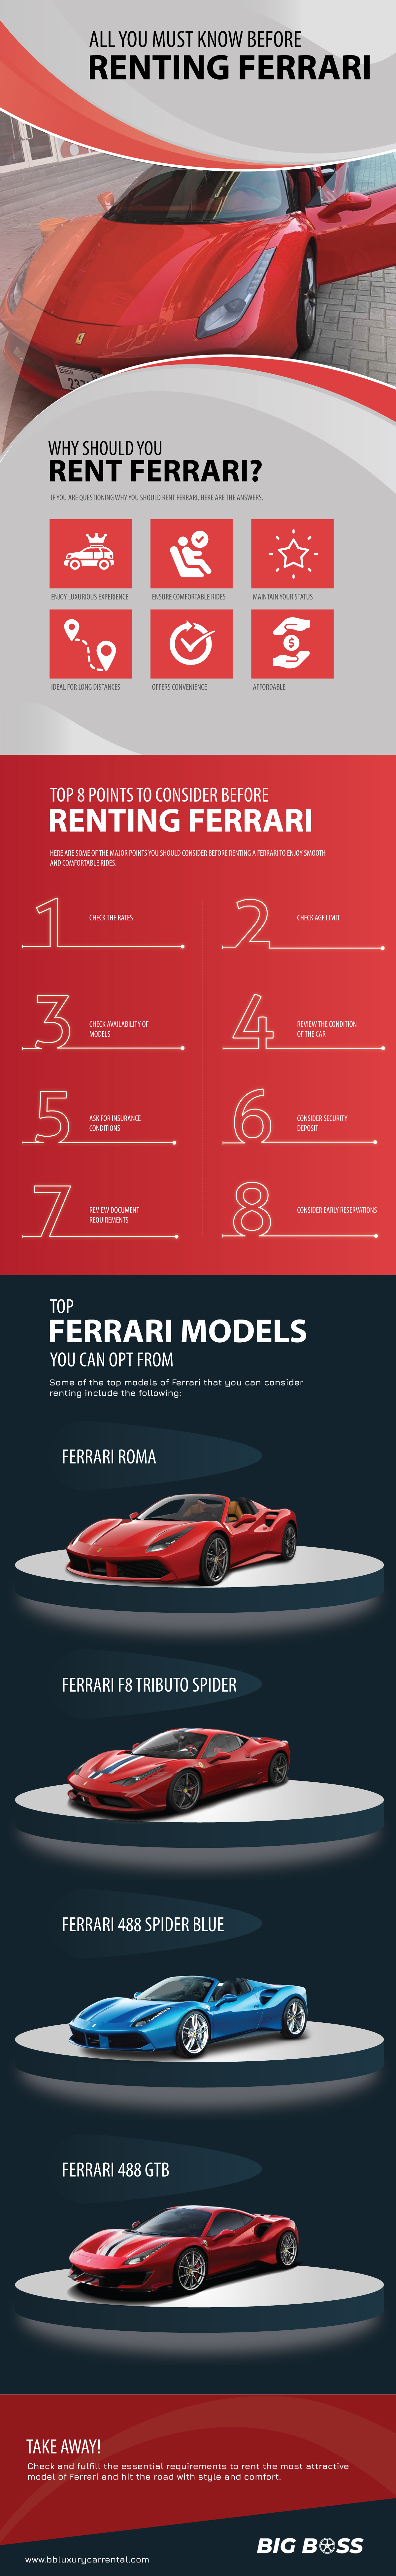 All You Must Know Before Renting Ferrari